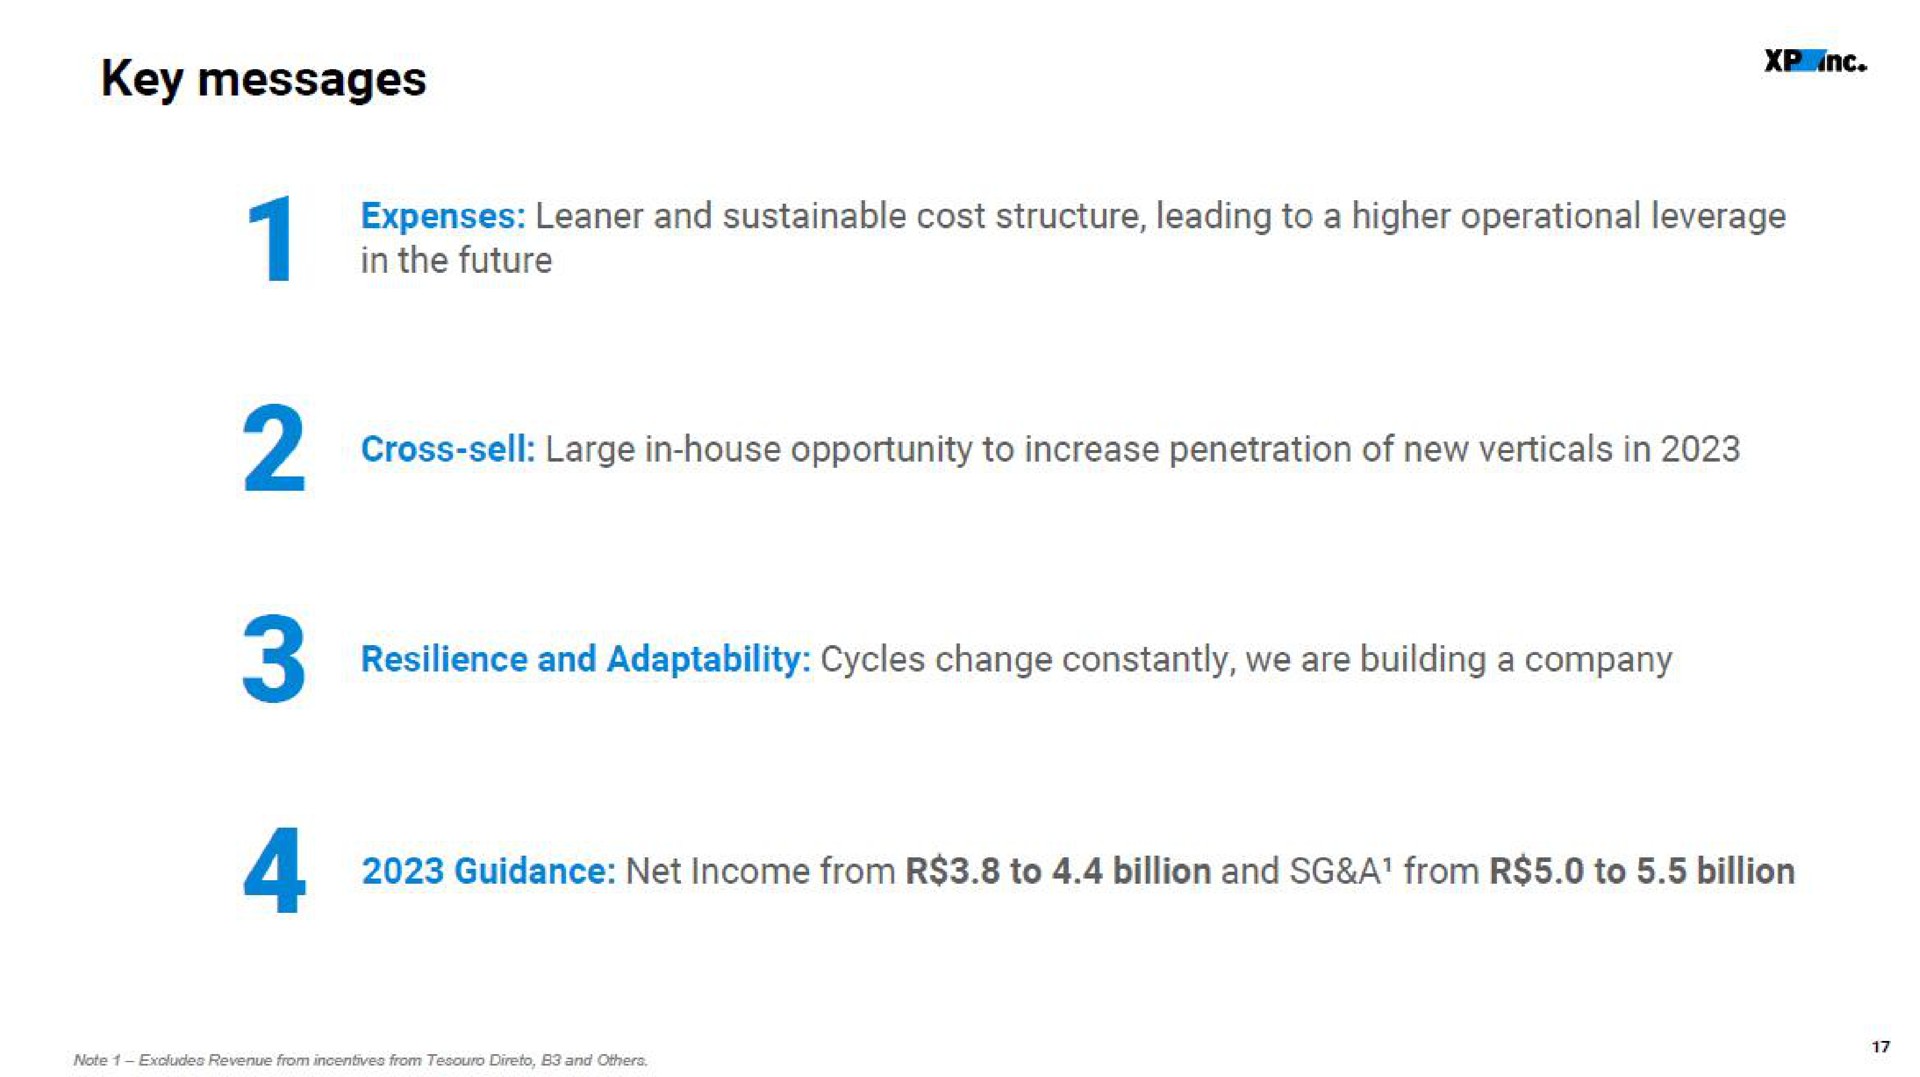 key messages guidance net income from to billion and a from to billion | XP Inc